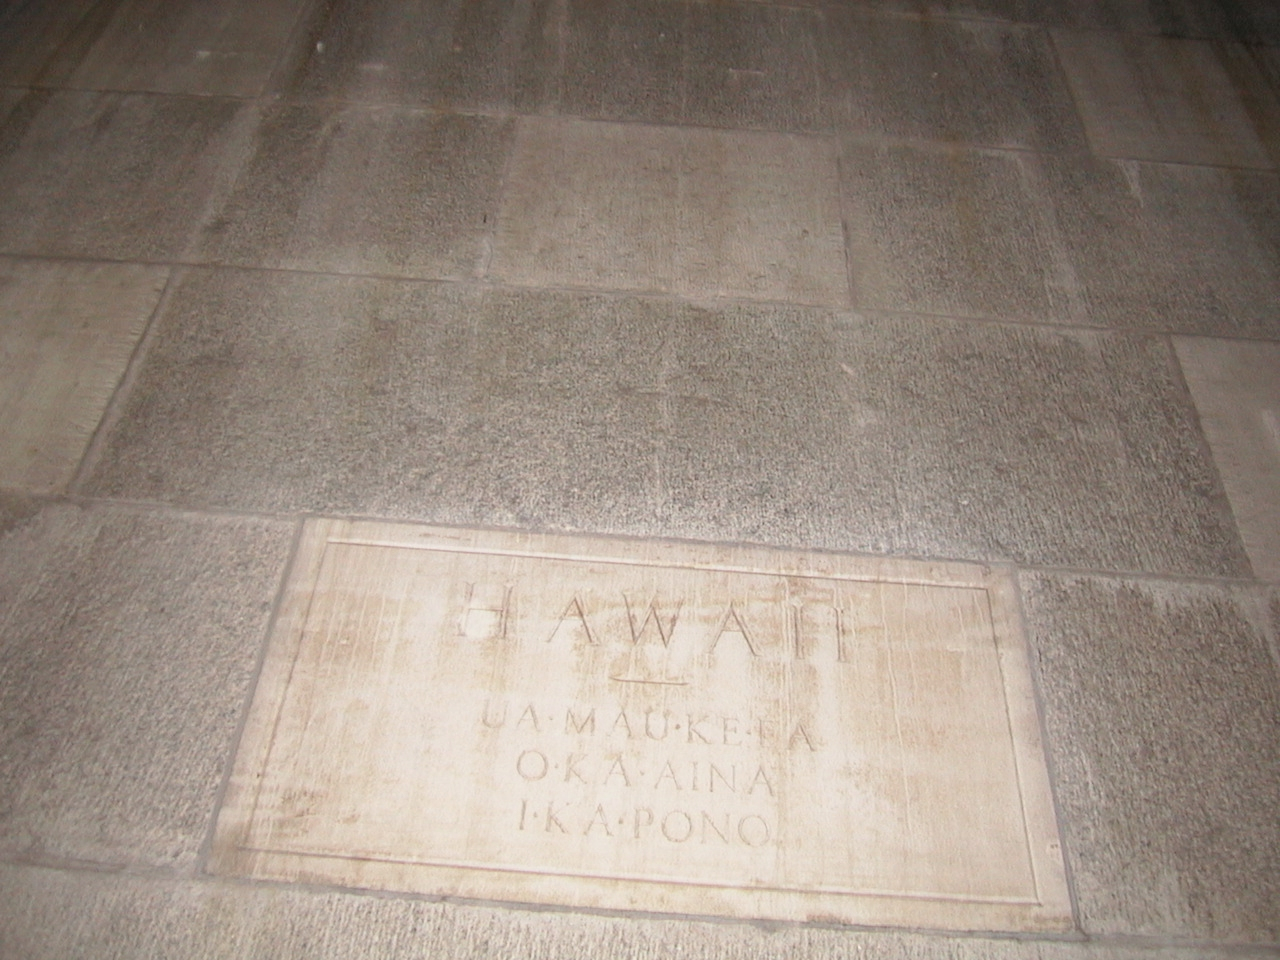 The Hawaii Memorial Stone, one of many memorial stones placedin the Washington Monument